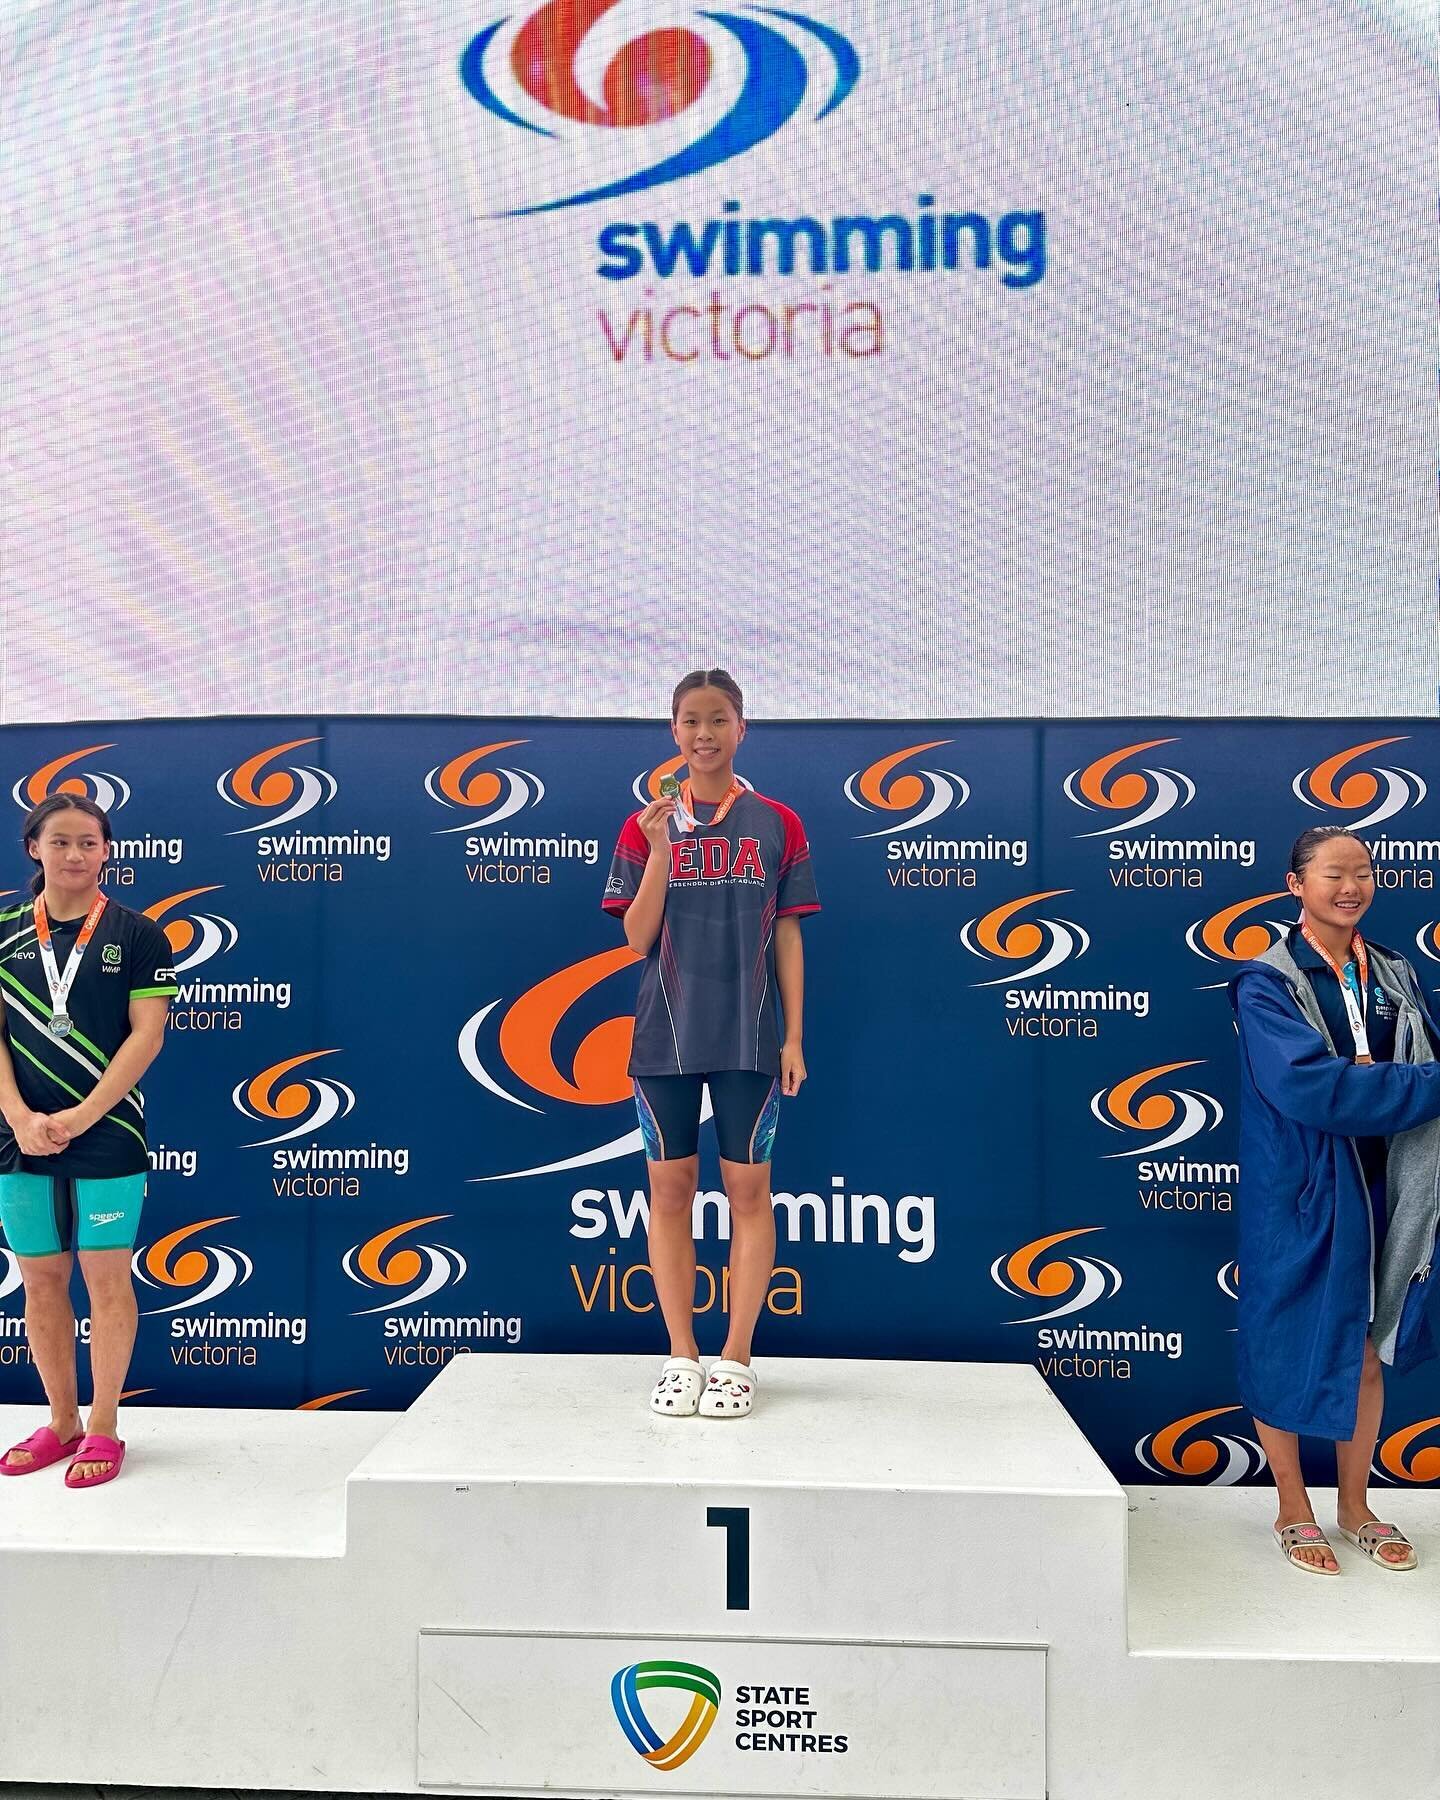 Victorian Sprint Champs - Day 1
Day 1 saw our 14/U swimmers hit the pool. It was a great morning with PB&rsquo;s and new National Times achieved. 
Megan, Ruolan, Mia, Lucinda (relay), River (relay) &amp; Matthew (relay) were back in the pool for the 